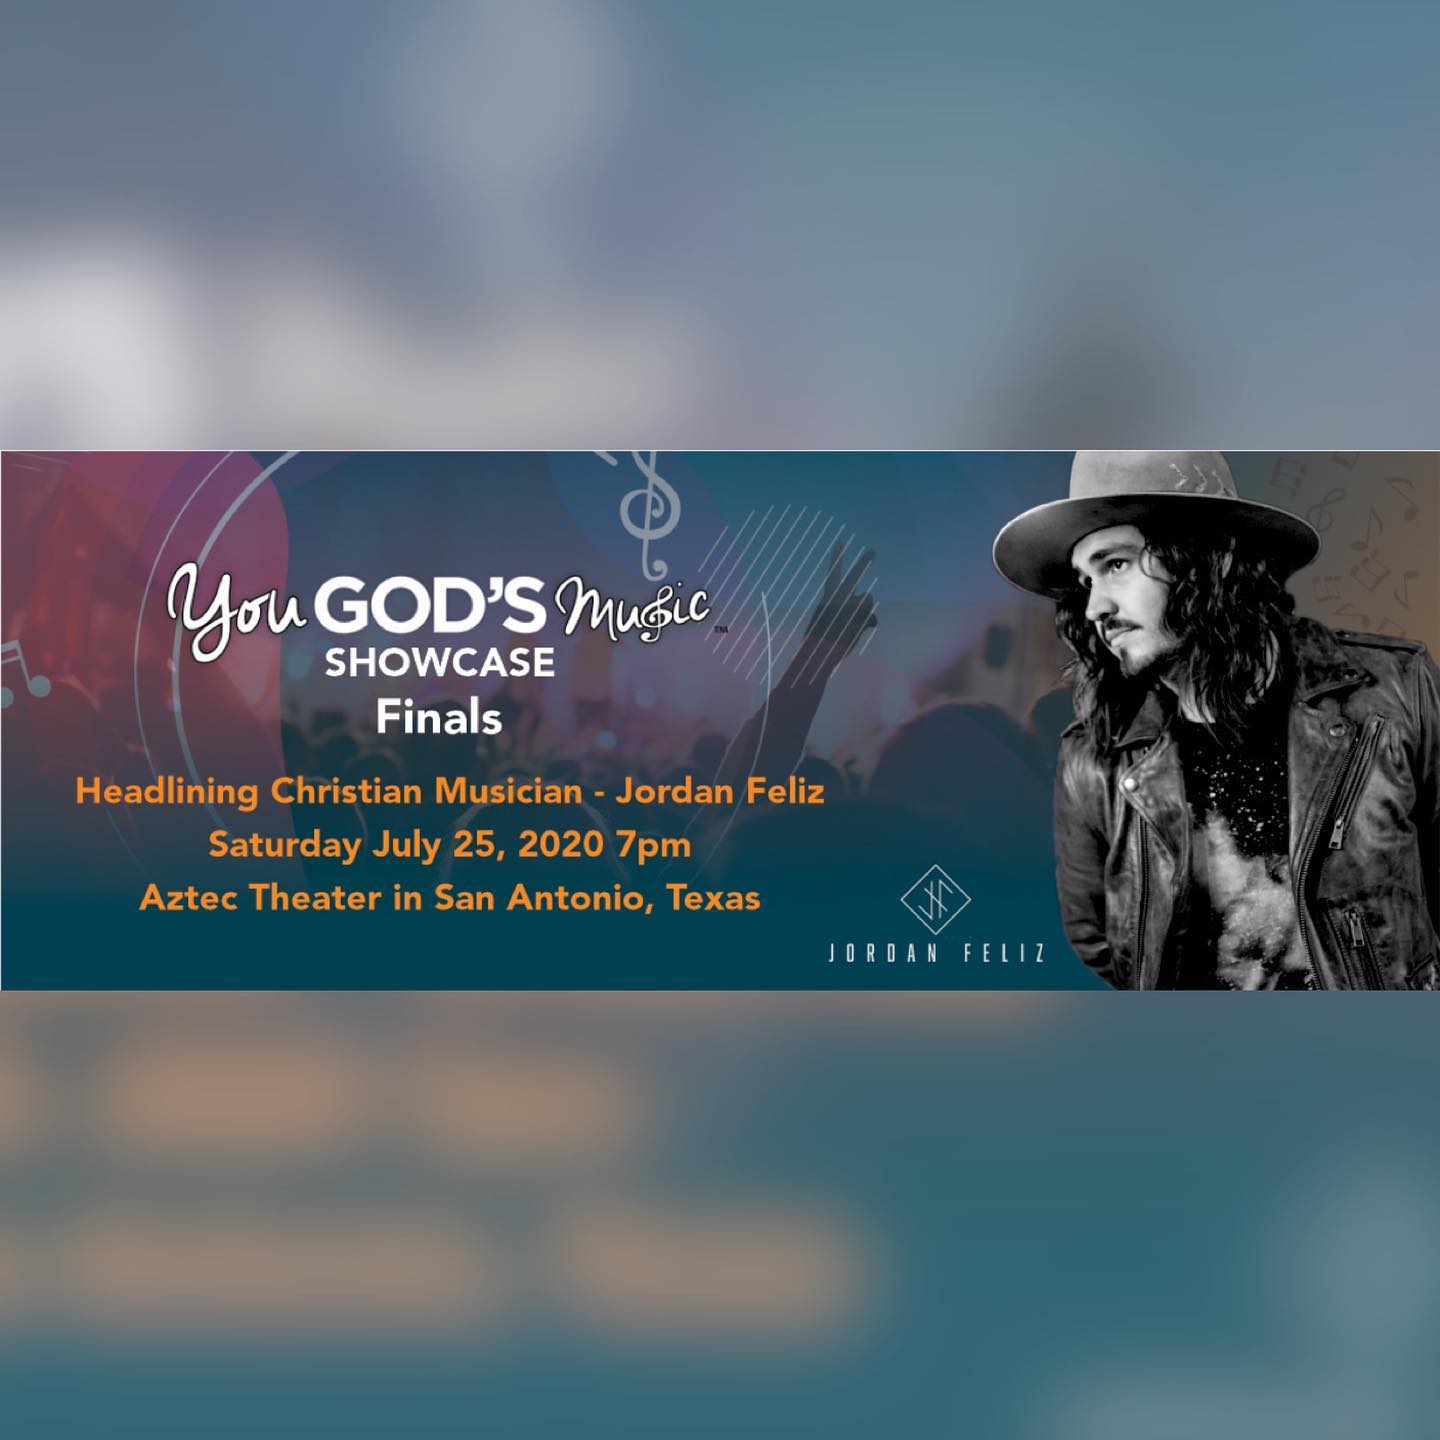 Tickets for the You God’s Music Showcase Finals are now on sale as of 10am CST through Ticketmaster!